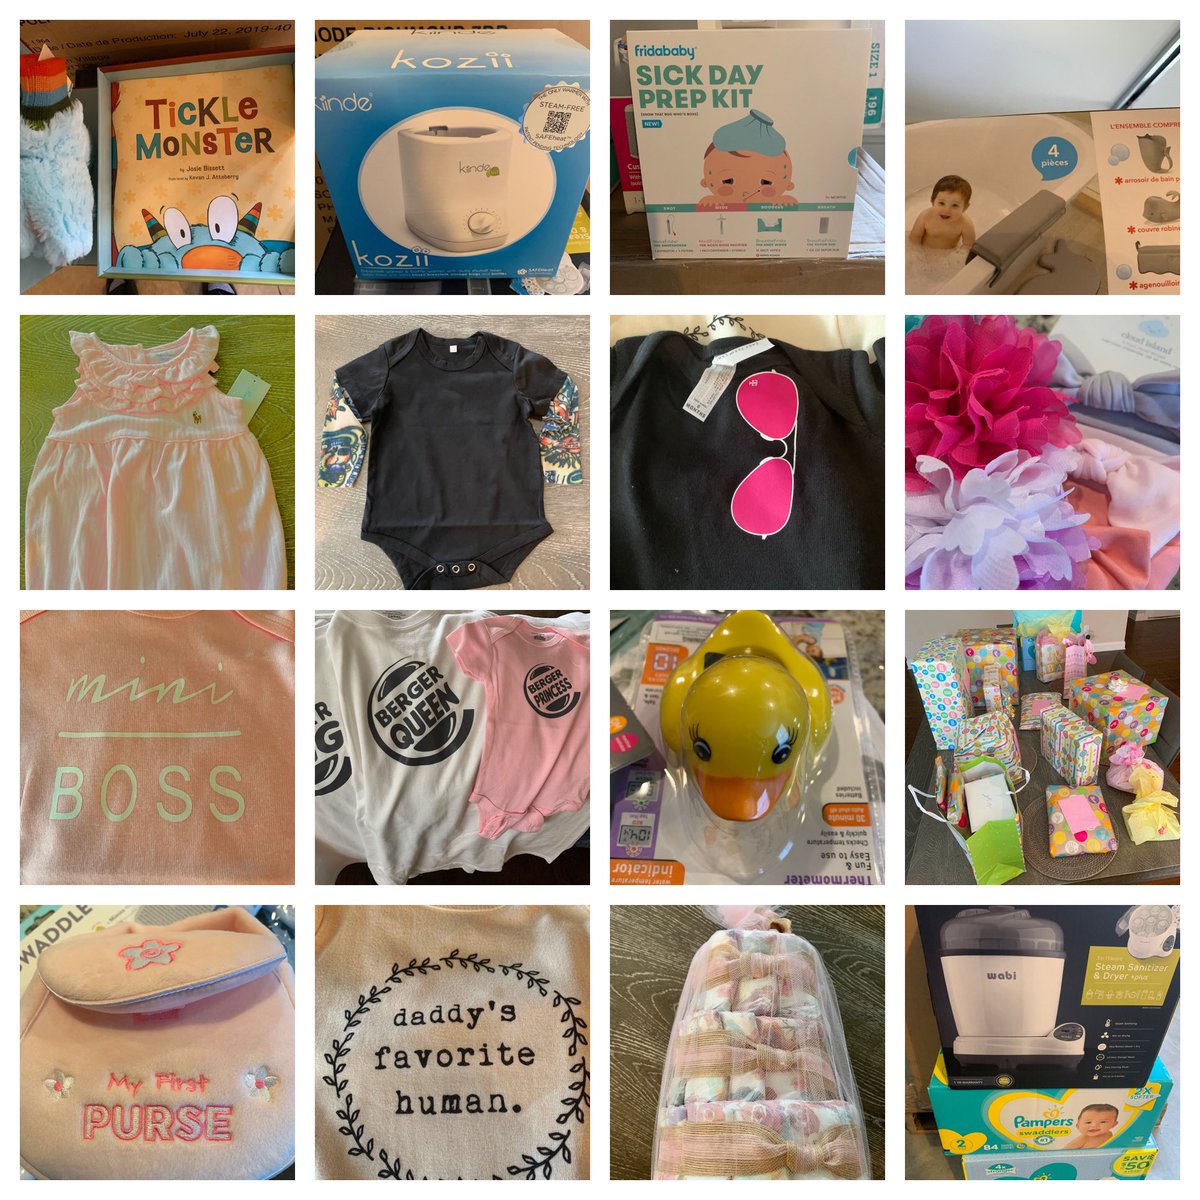 Seriously have the best team ever! With our 1st child expected, 1 of the Mom moments was kinda pulled away but my team found a way to make our baby shower happen virtually! Thx so much #GulfCoastProud Love you all! 👶💕🍼 #BergerPrincess 👑